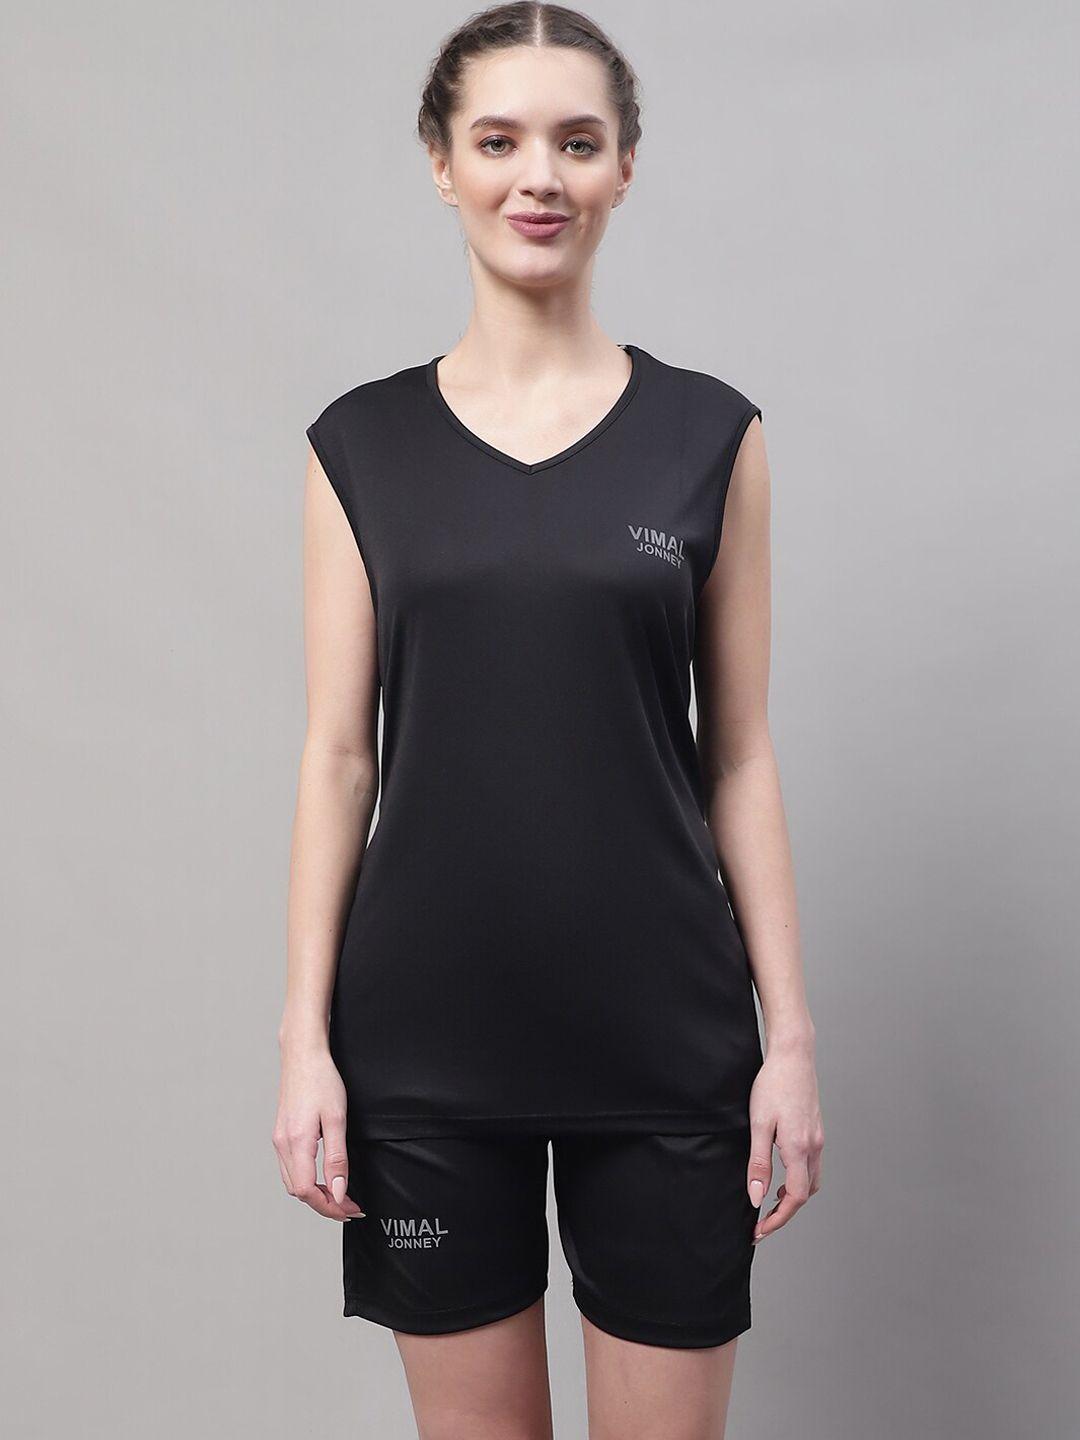 vimal jonney dry-fit t-shirt with shorts co-ords